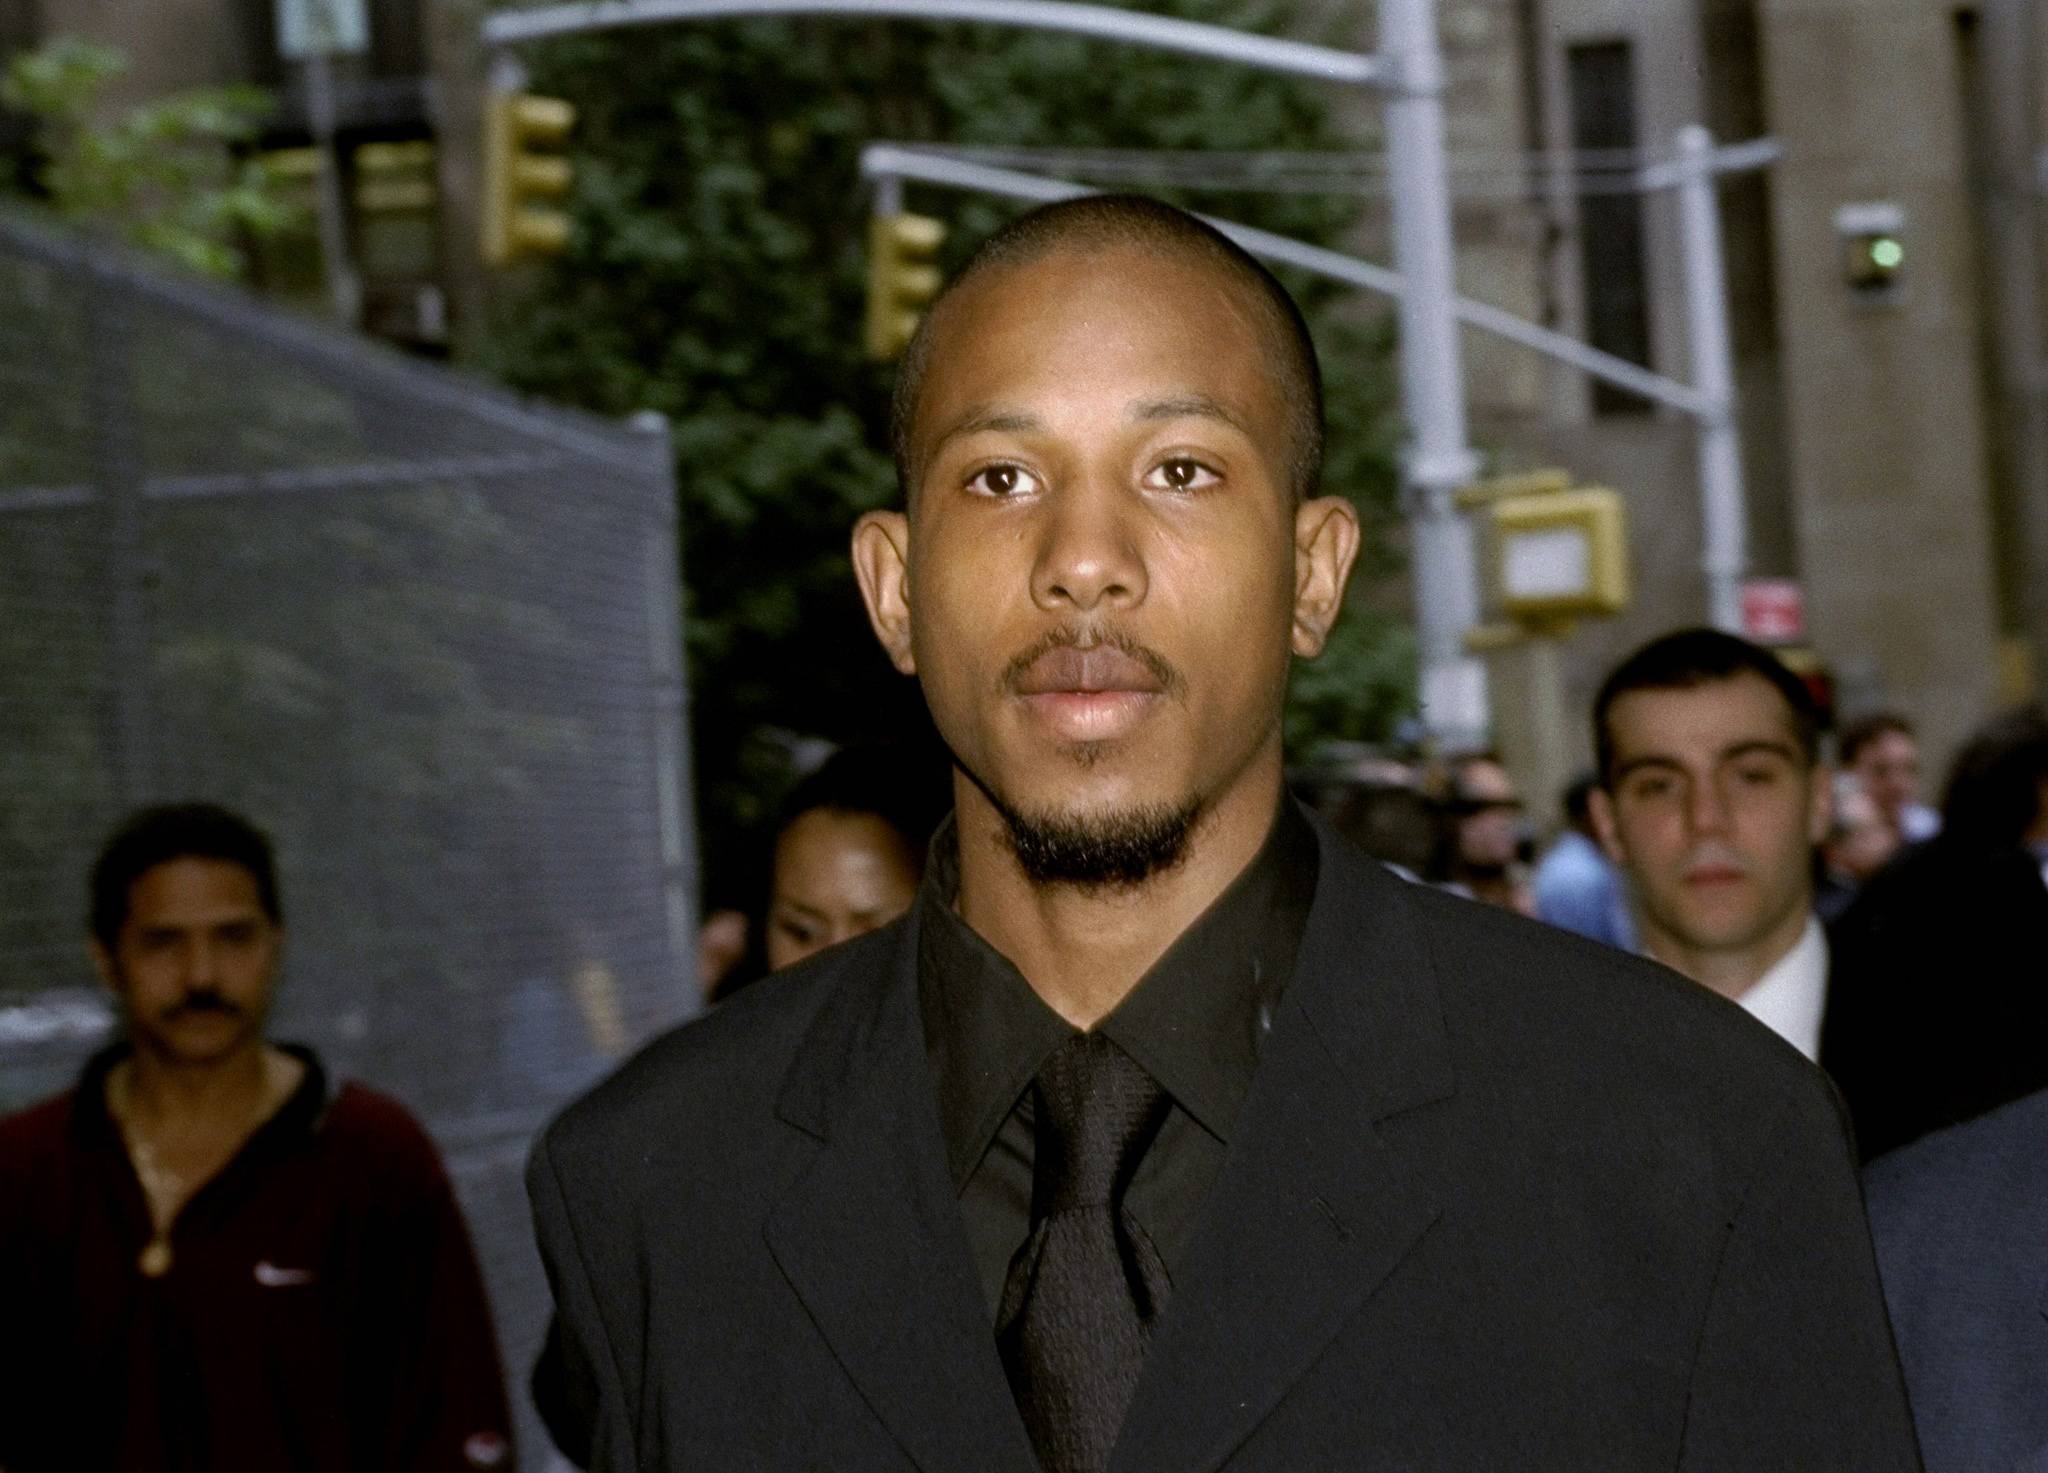 UNITED STATES - CIRCA 2000:  Jamal (Shyne) Barrow, a rap protege of Sean (Puffy) Combs, leaves Manhattan Supreme Court after a judge ordered him to return in September to set a date for his trial on gun possession charges in connection with a shooting at Club New York on W. 43rd St. last December.  (Photo by Andrew Savulich/NY Daily News Archive via Getty Images)